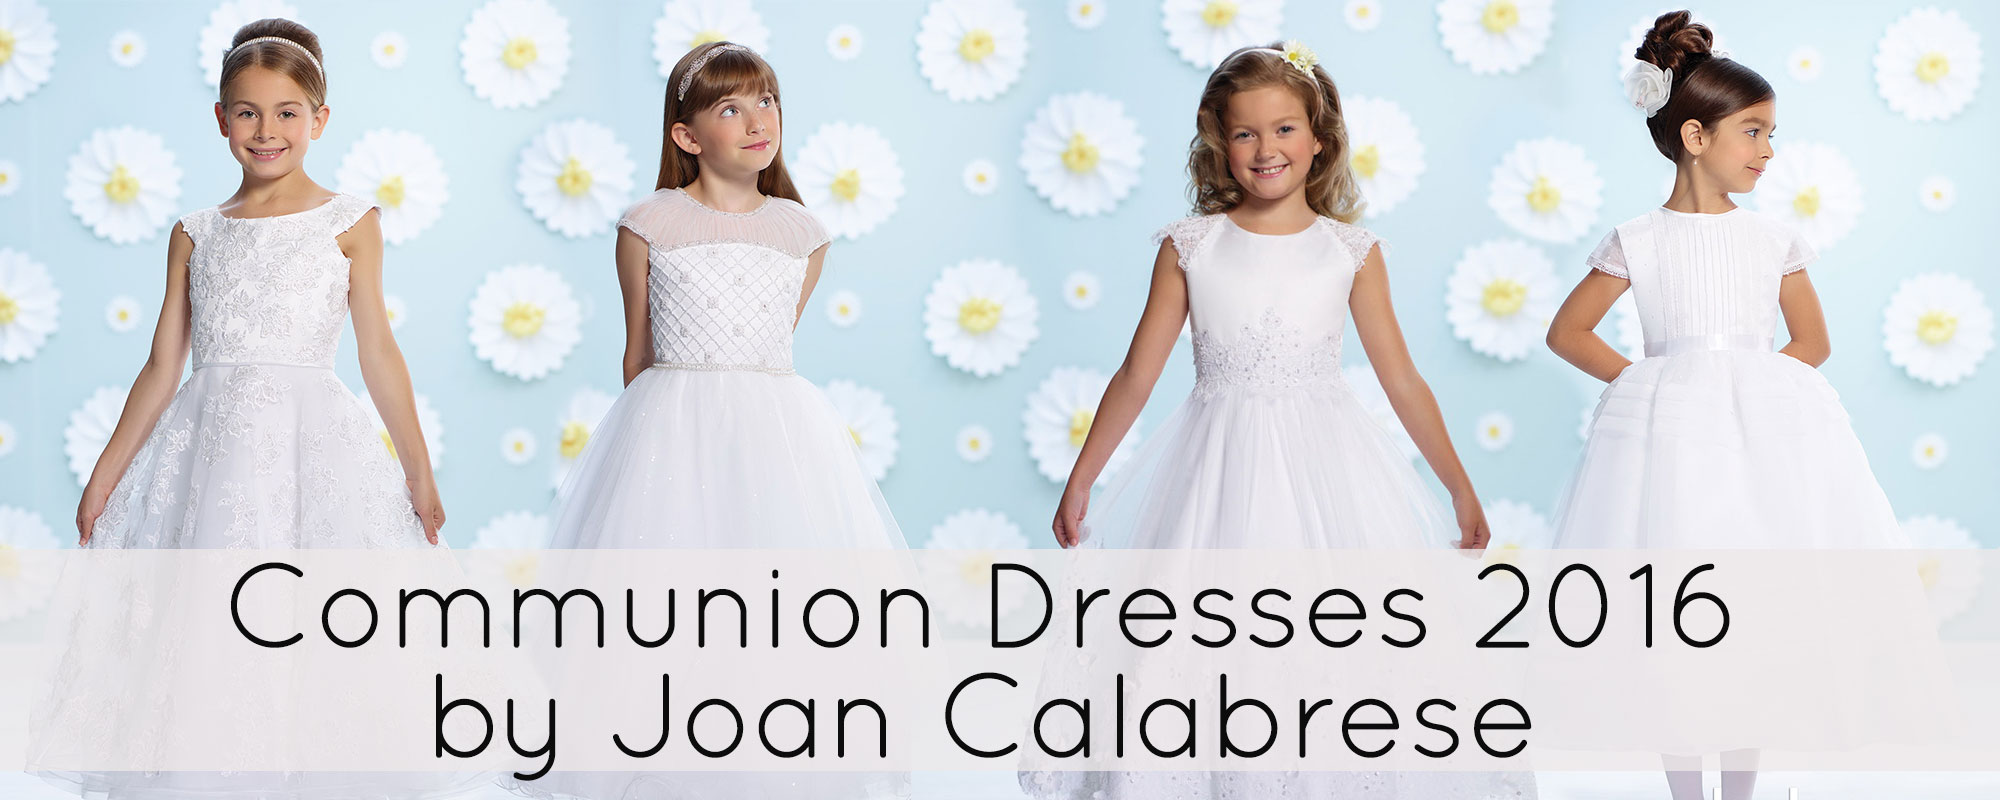 Communion Dresses 2016 by Joan Calabrese